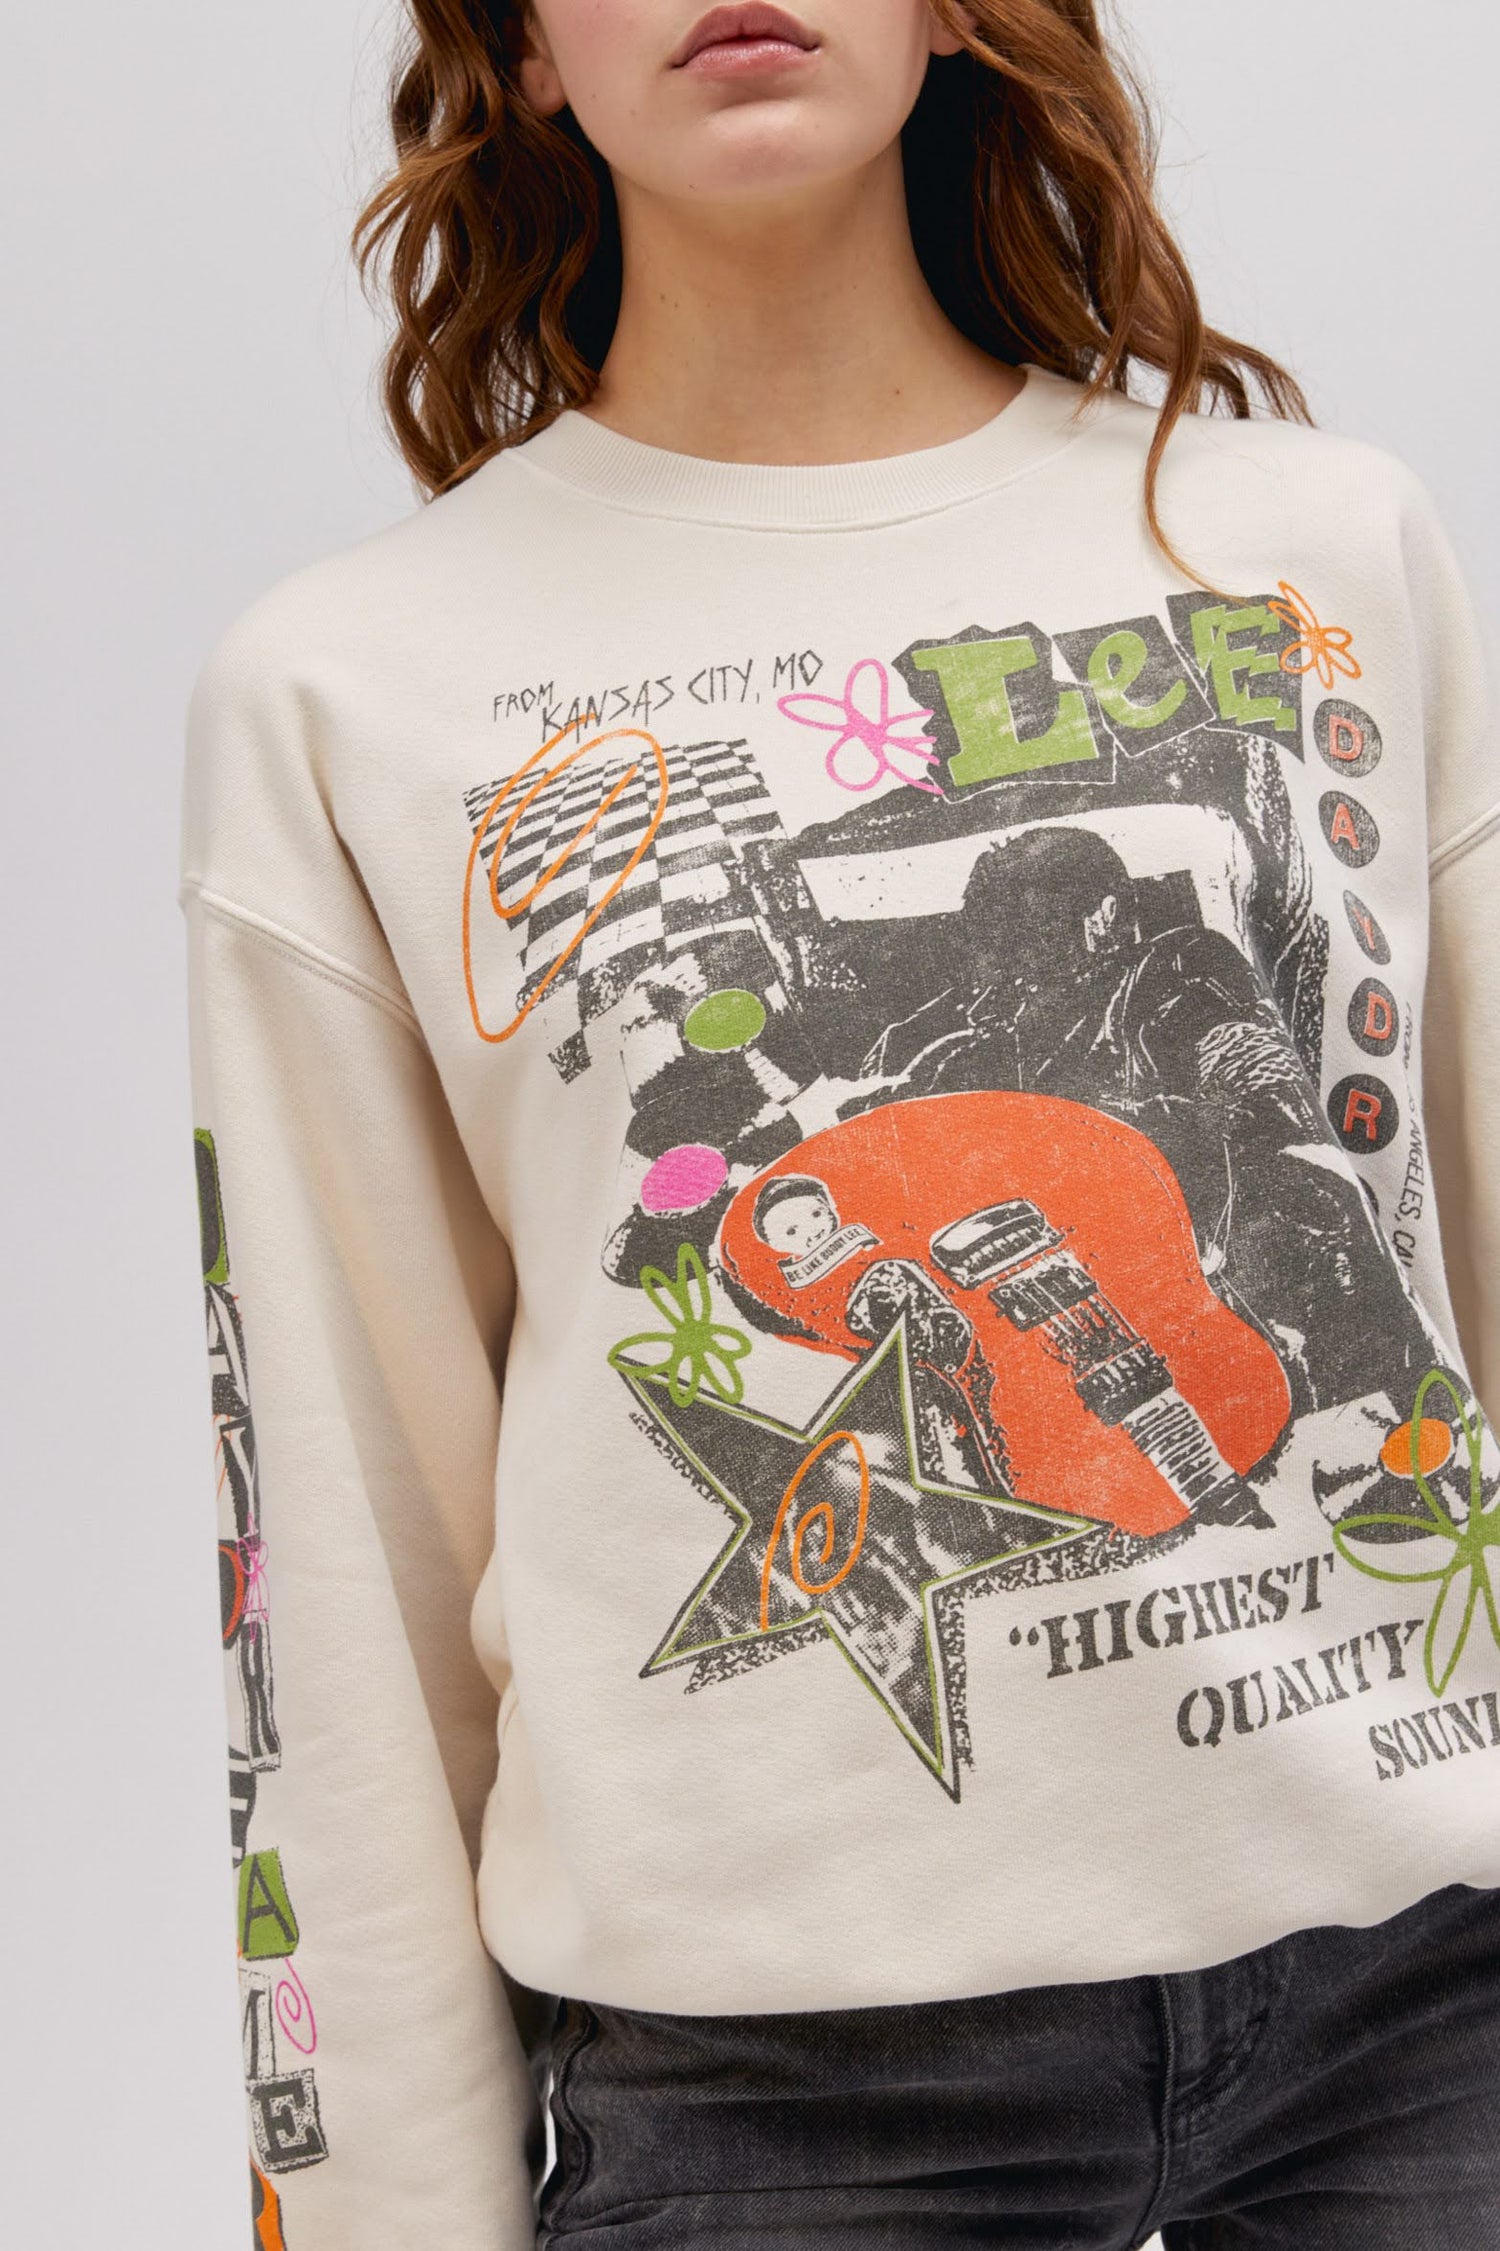 close up detail photo of model wearing off white colored sweatshirt with washed graphics